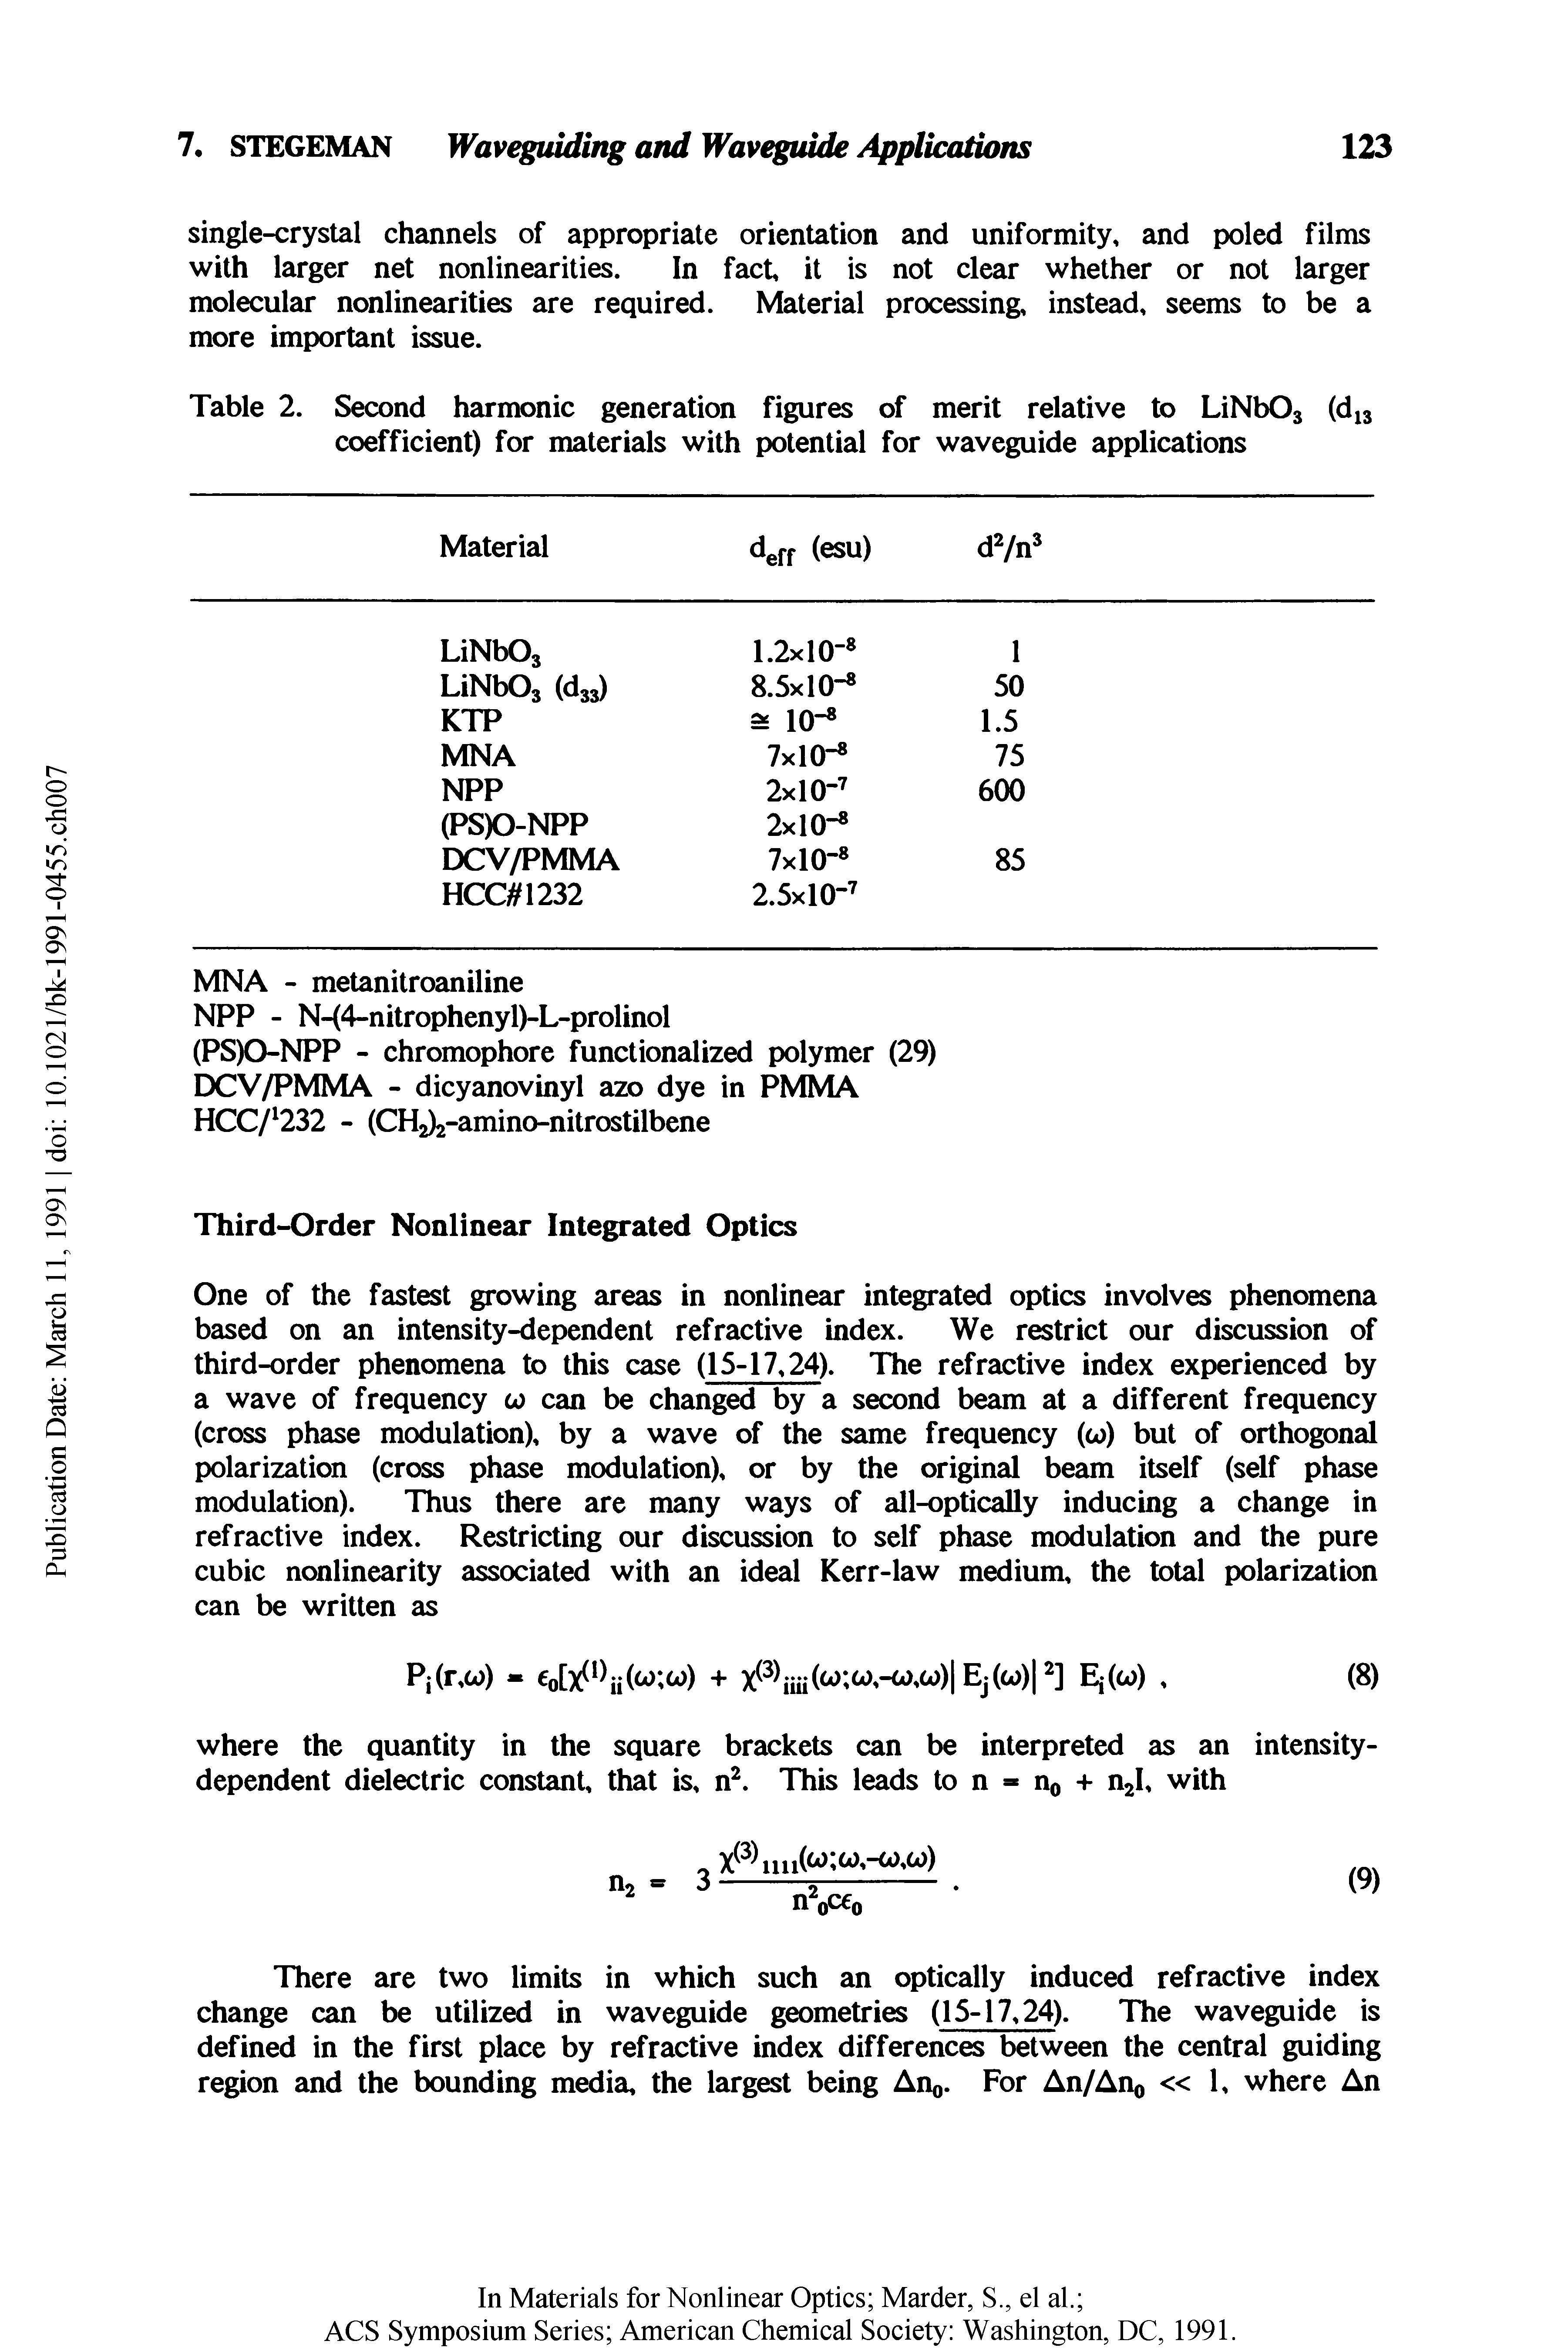 Table 2. Second harmonic generation figures of merit relative to LiNb03 (d13 coefficient) for materials with potential for waveguide applications...